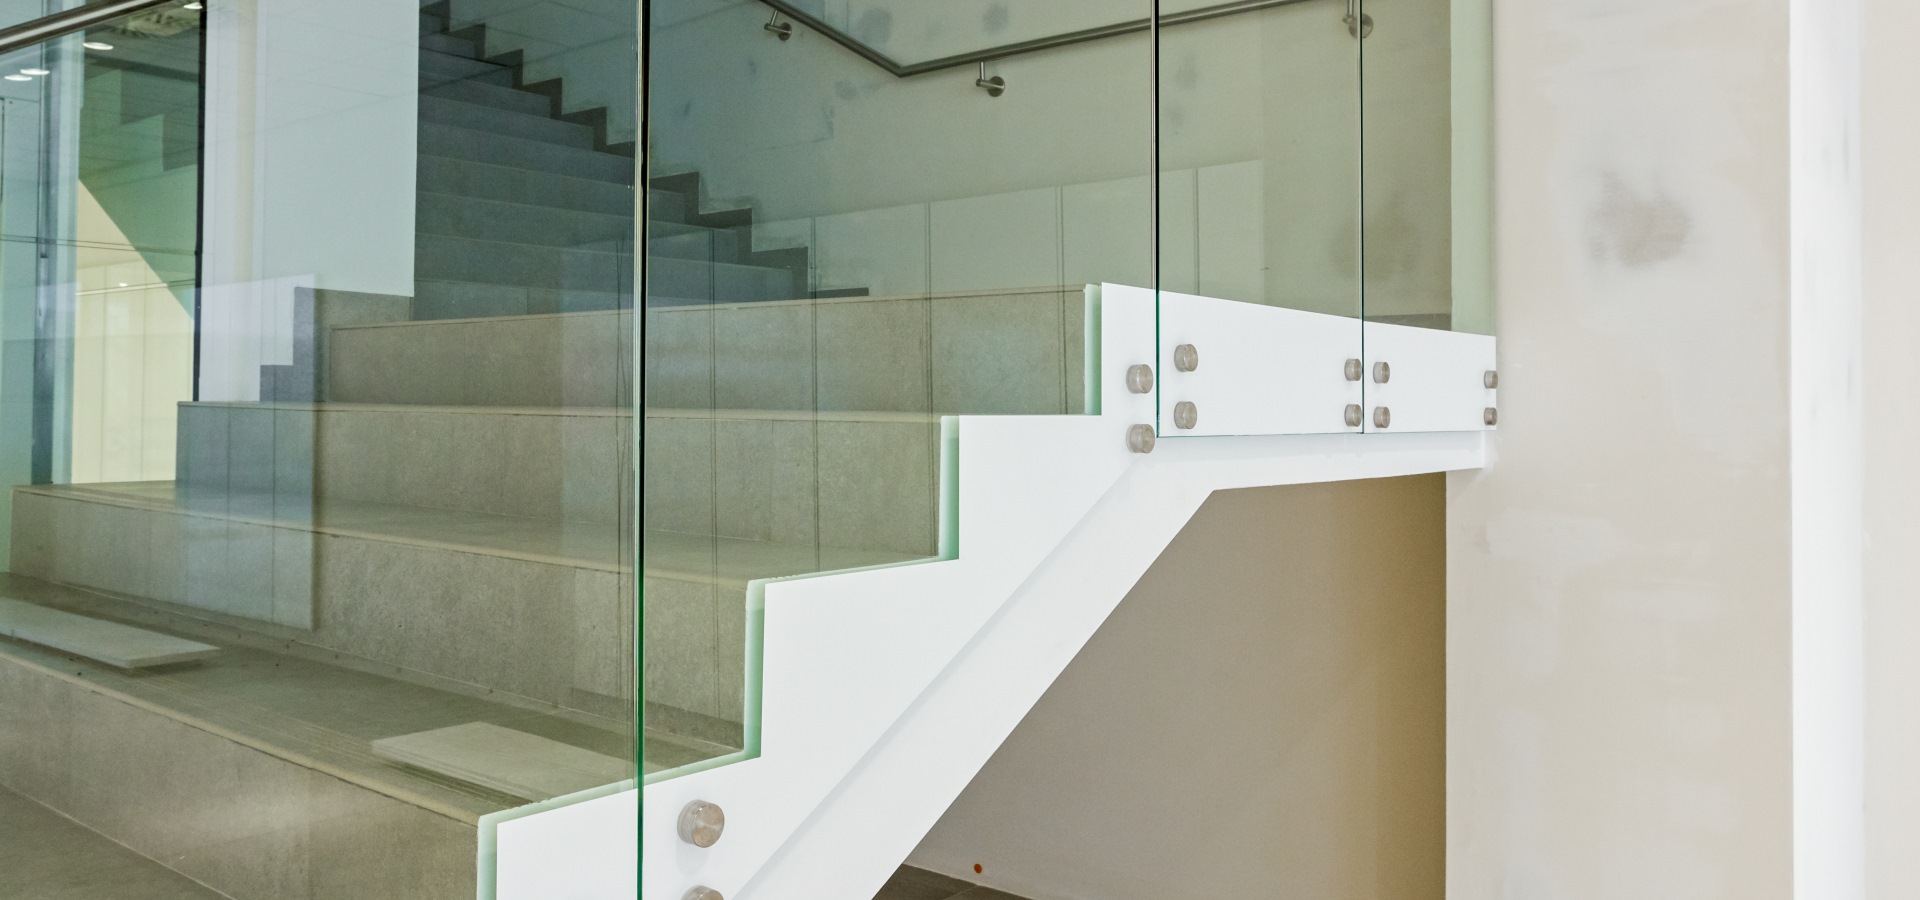 Detail on stairway with glass railing in a new modern building.